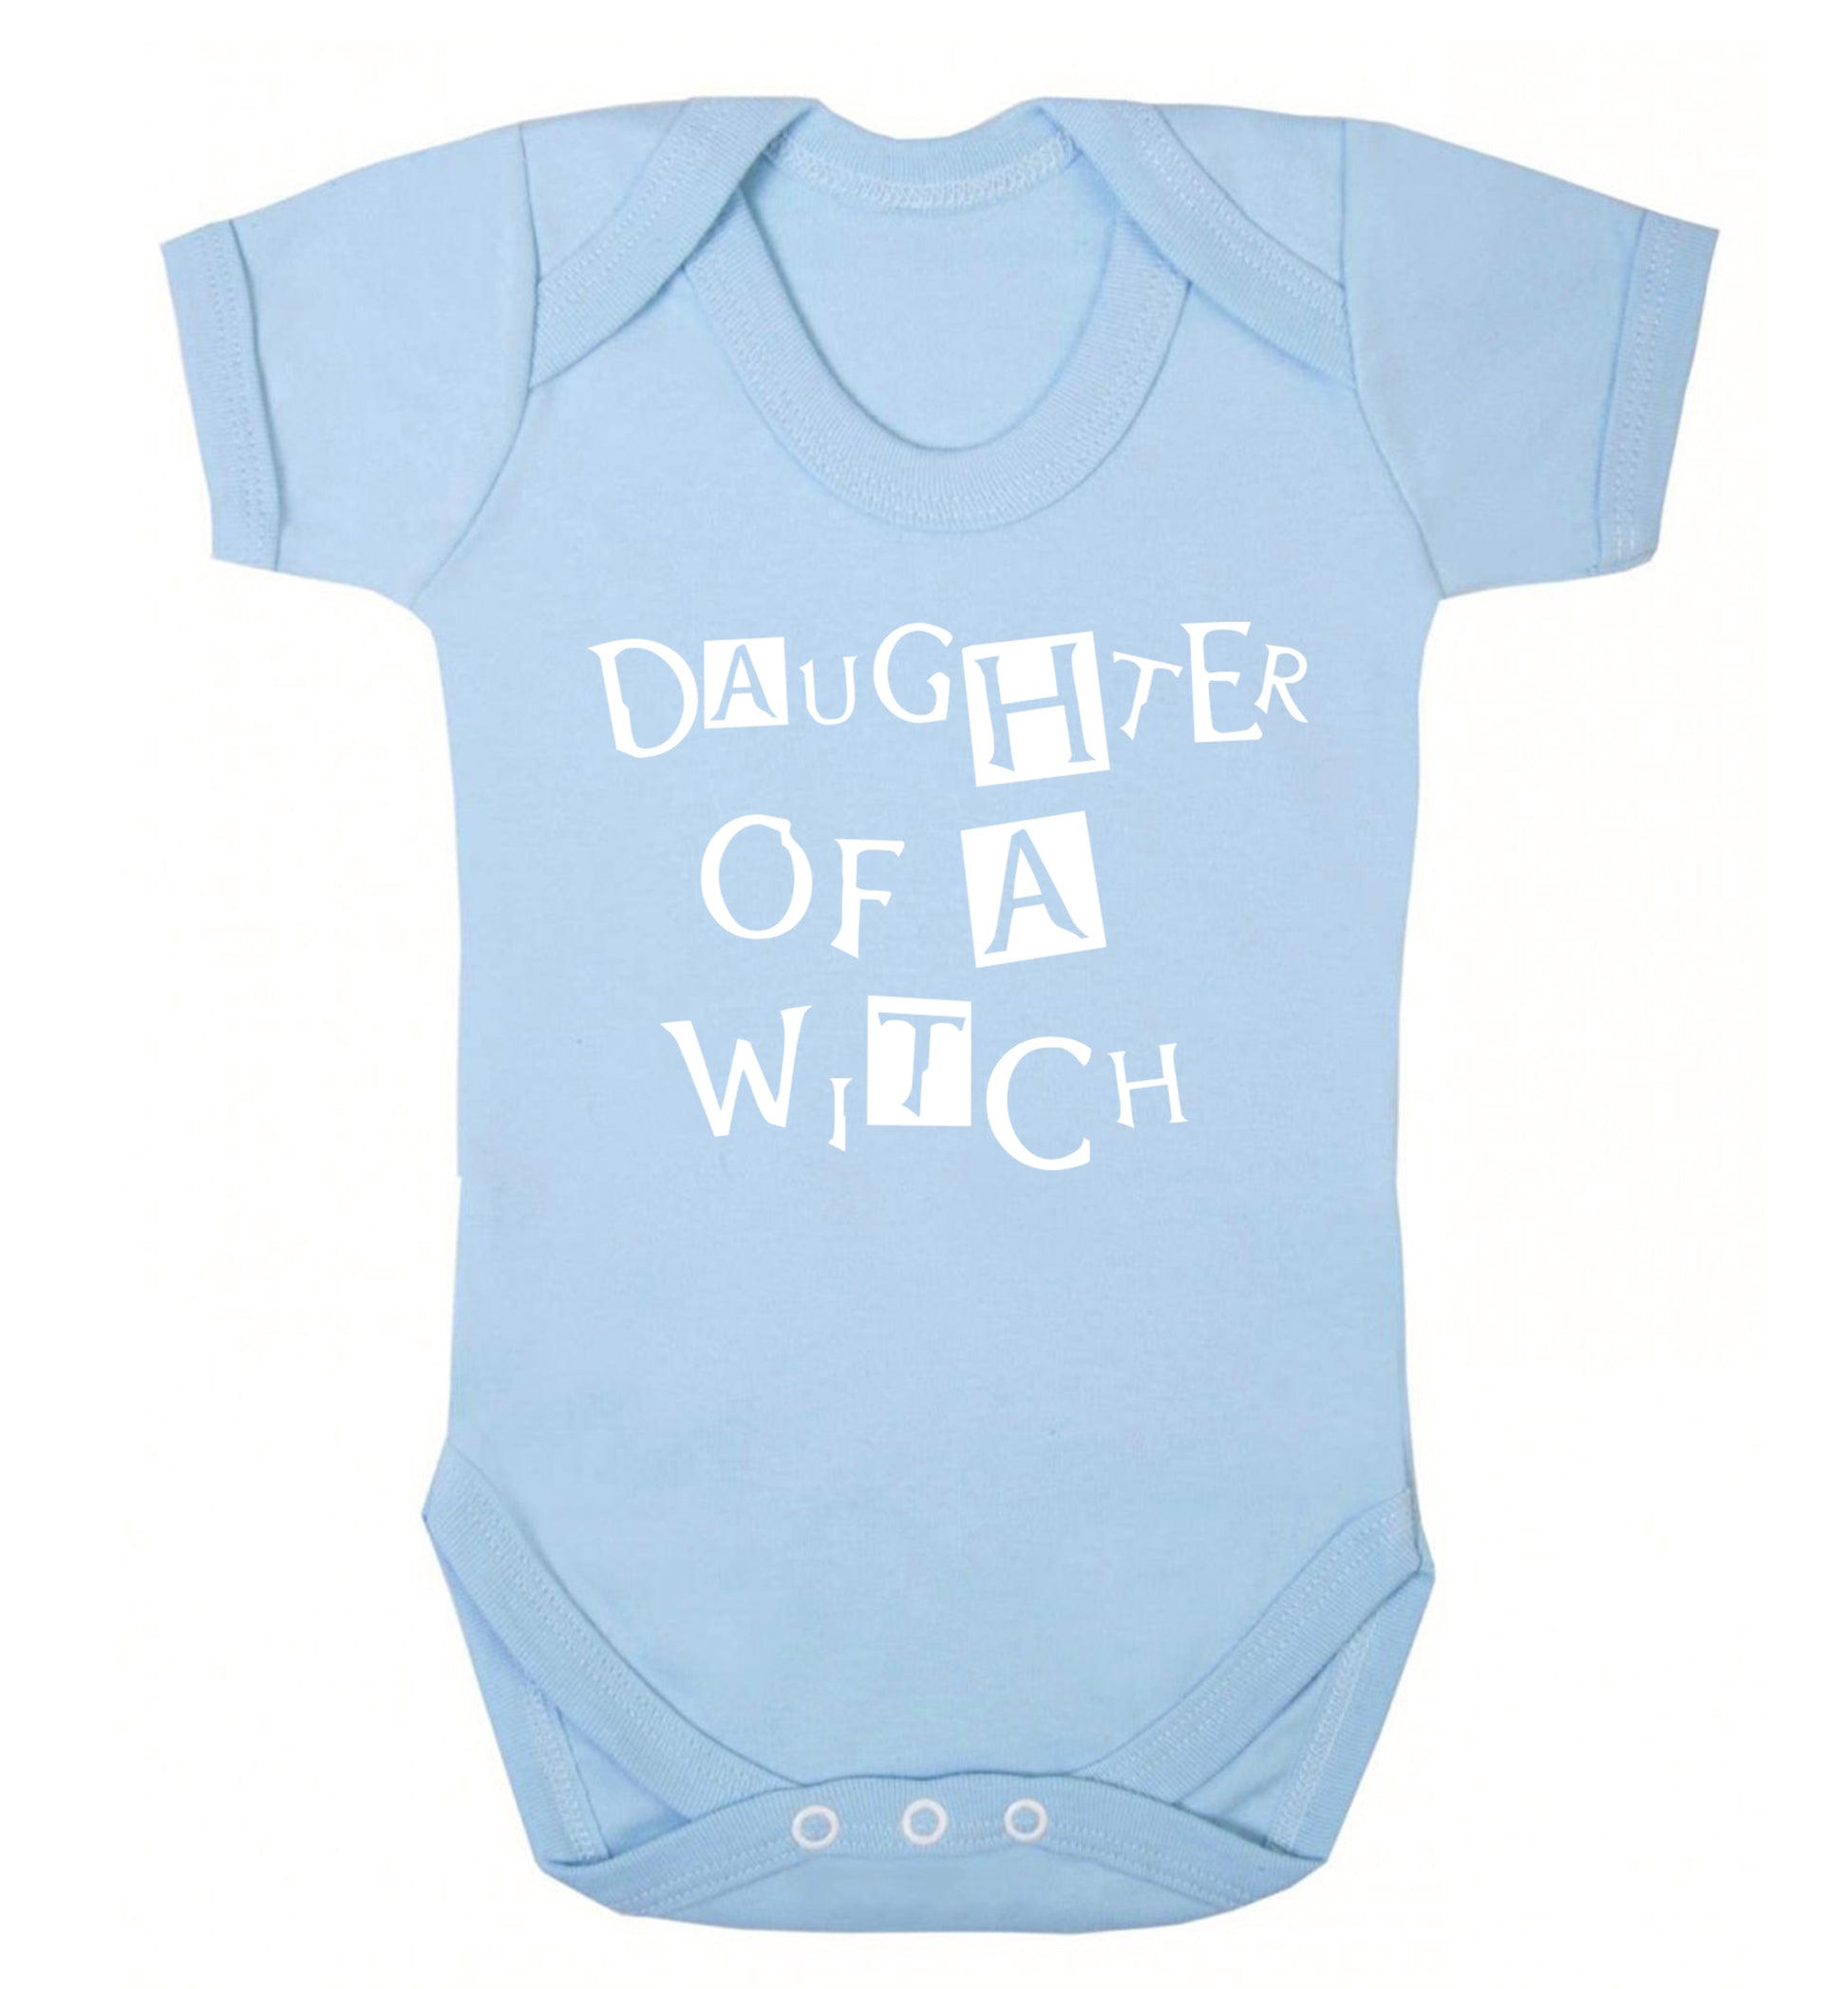 Daughter of a witch Baby Vest pale blue 18-24 months